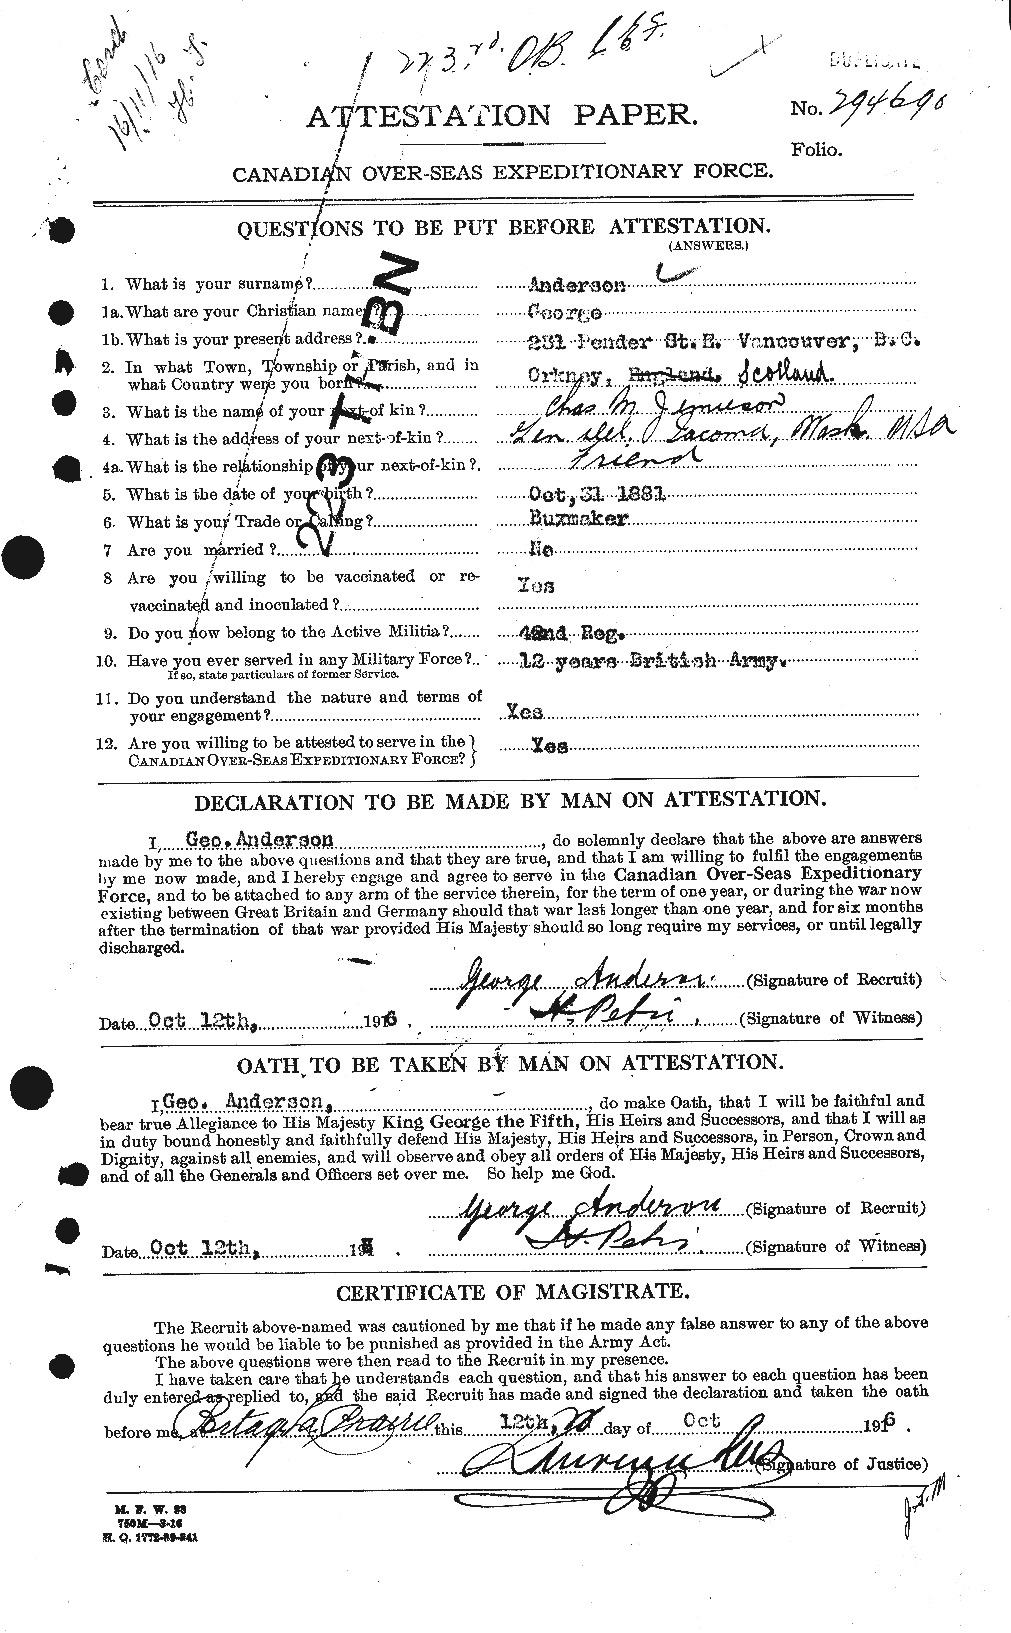 Personnel Records of the First World War - CEF 209781a